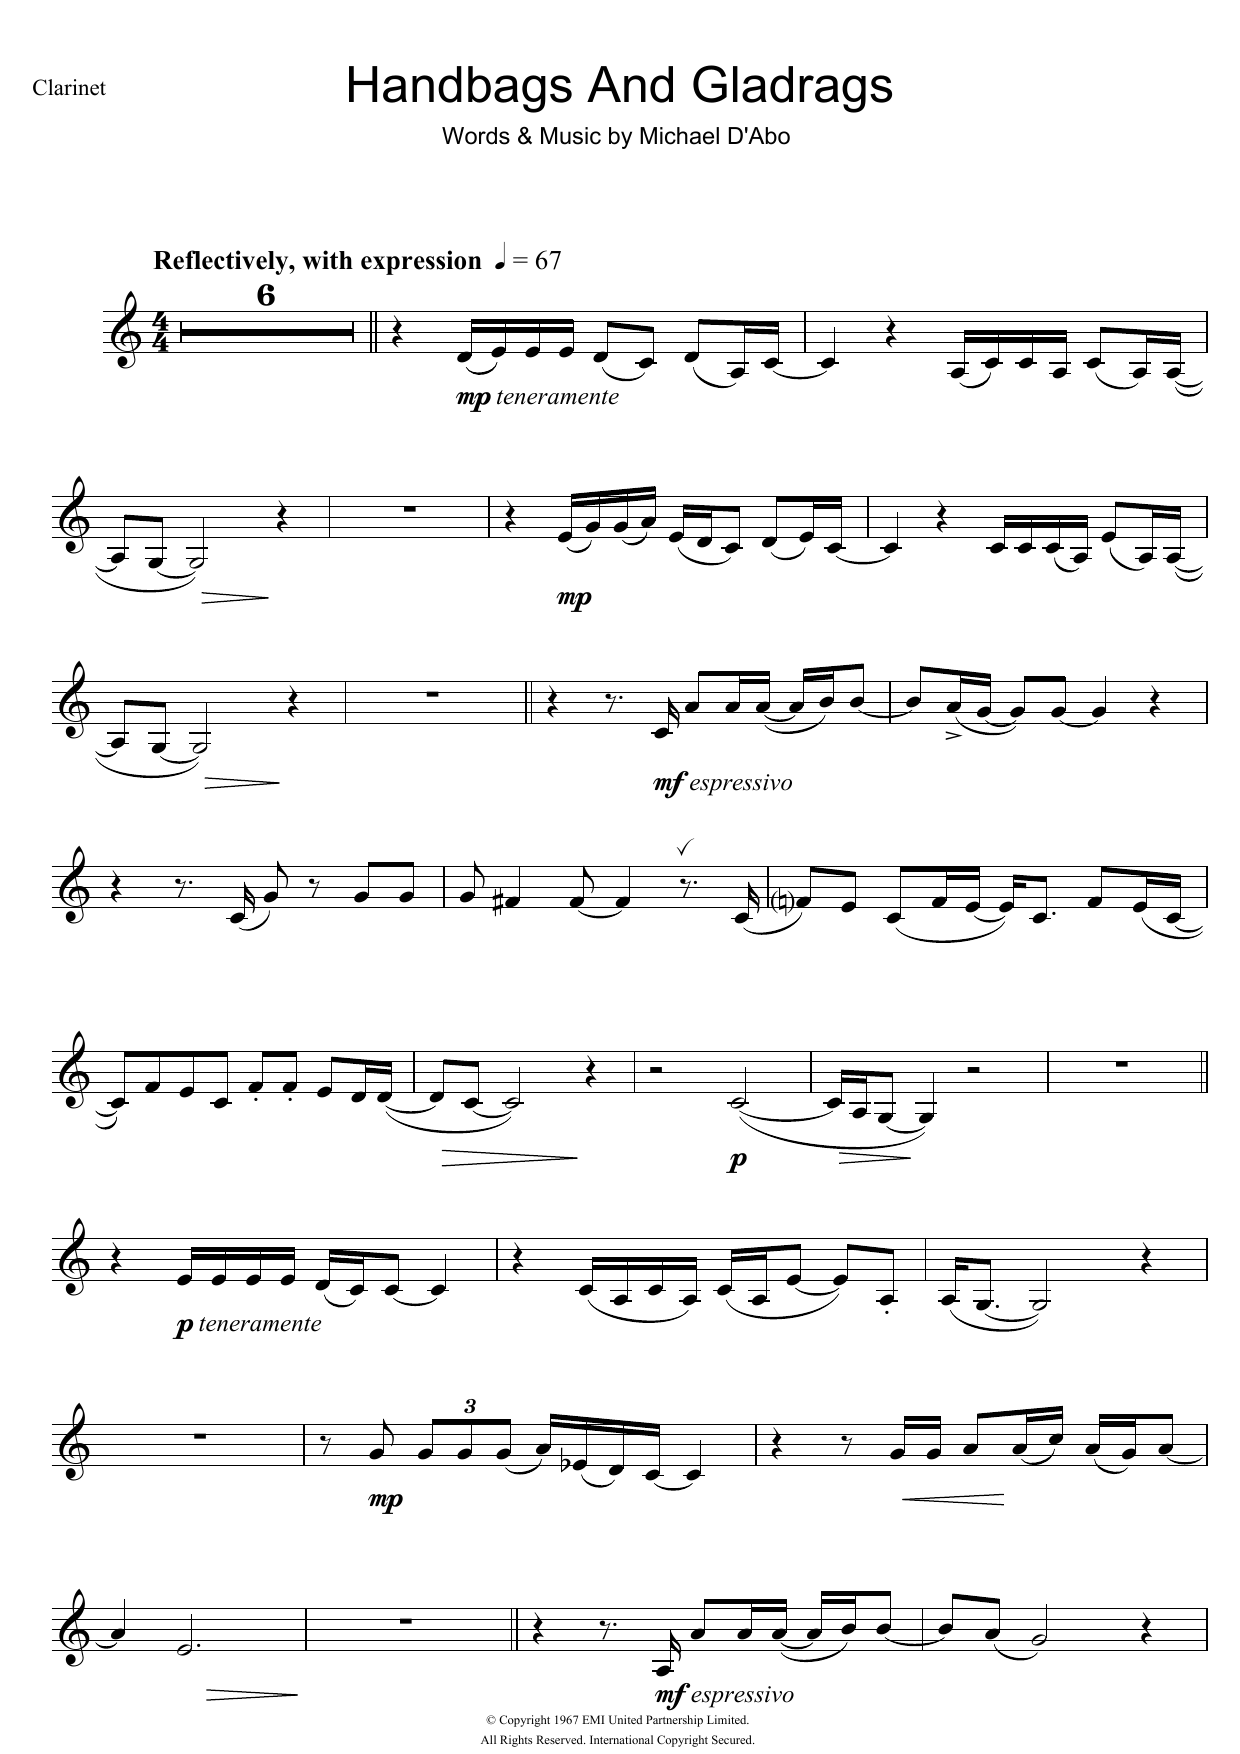 Download Stereophonics Handbags And Gladrags Sheet Music